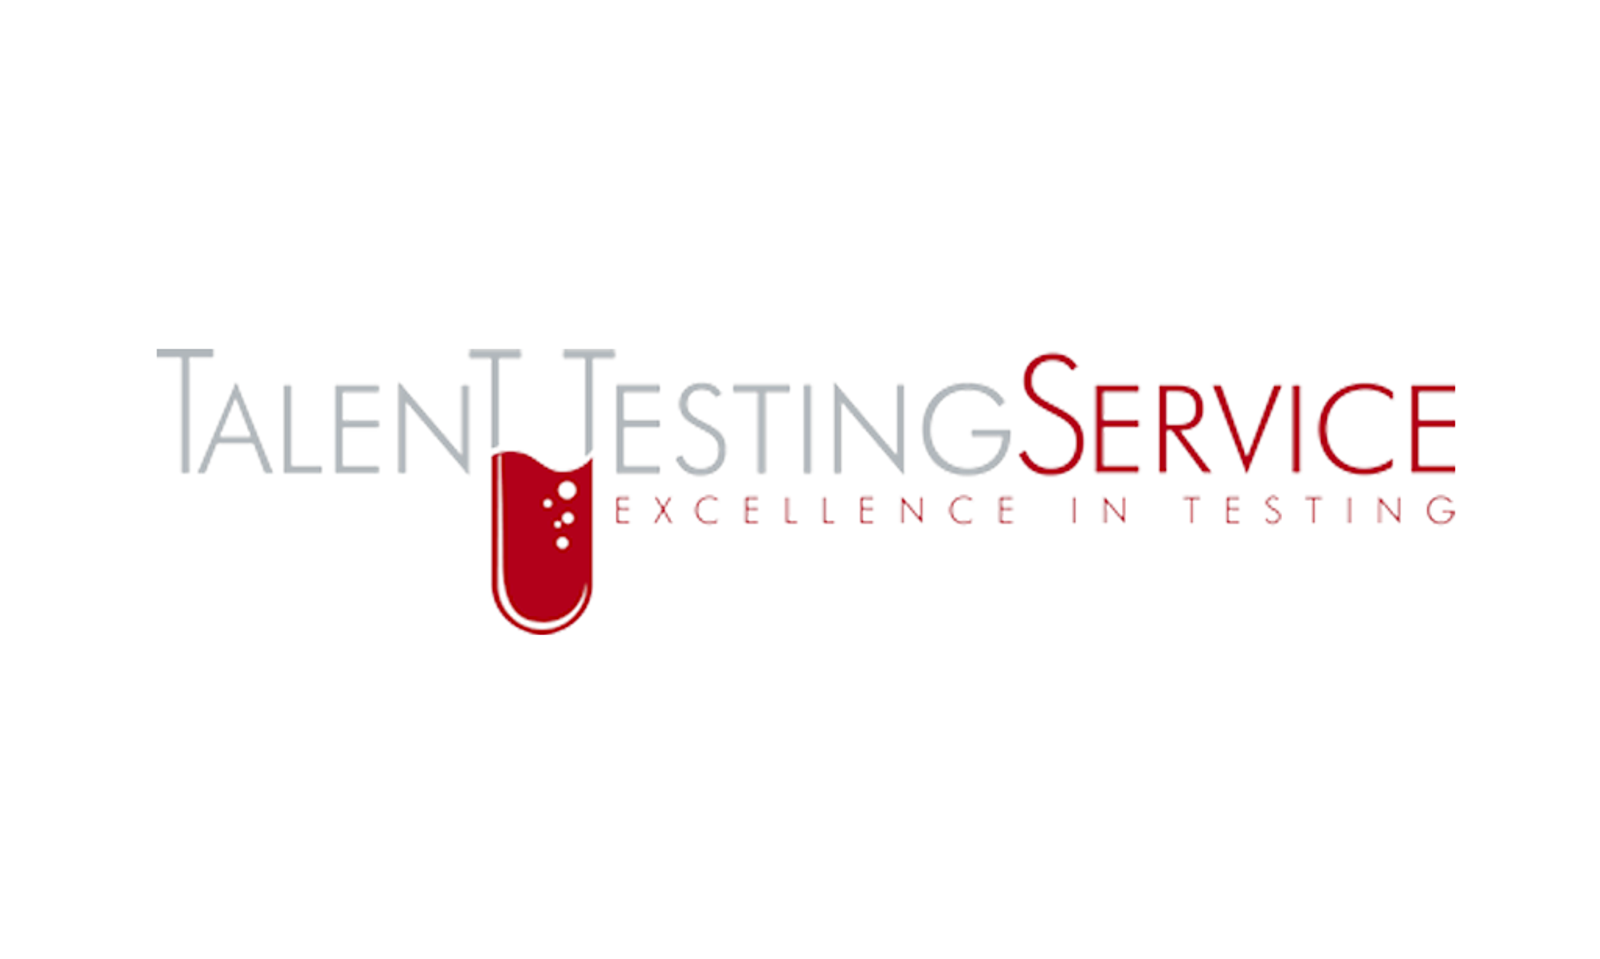 Talent Testing Service Opens New Location in Ft. Lauderdale